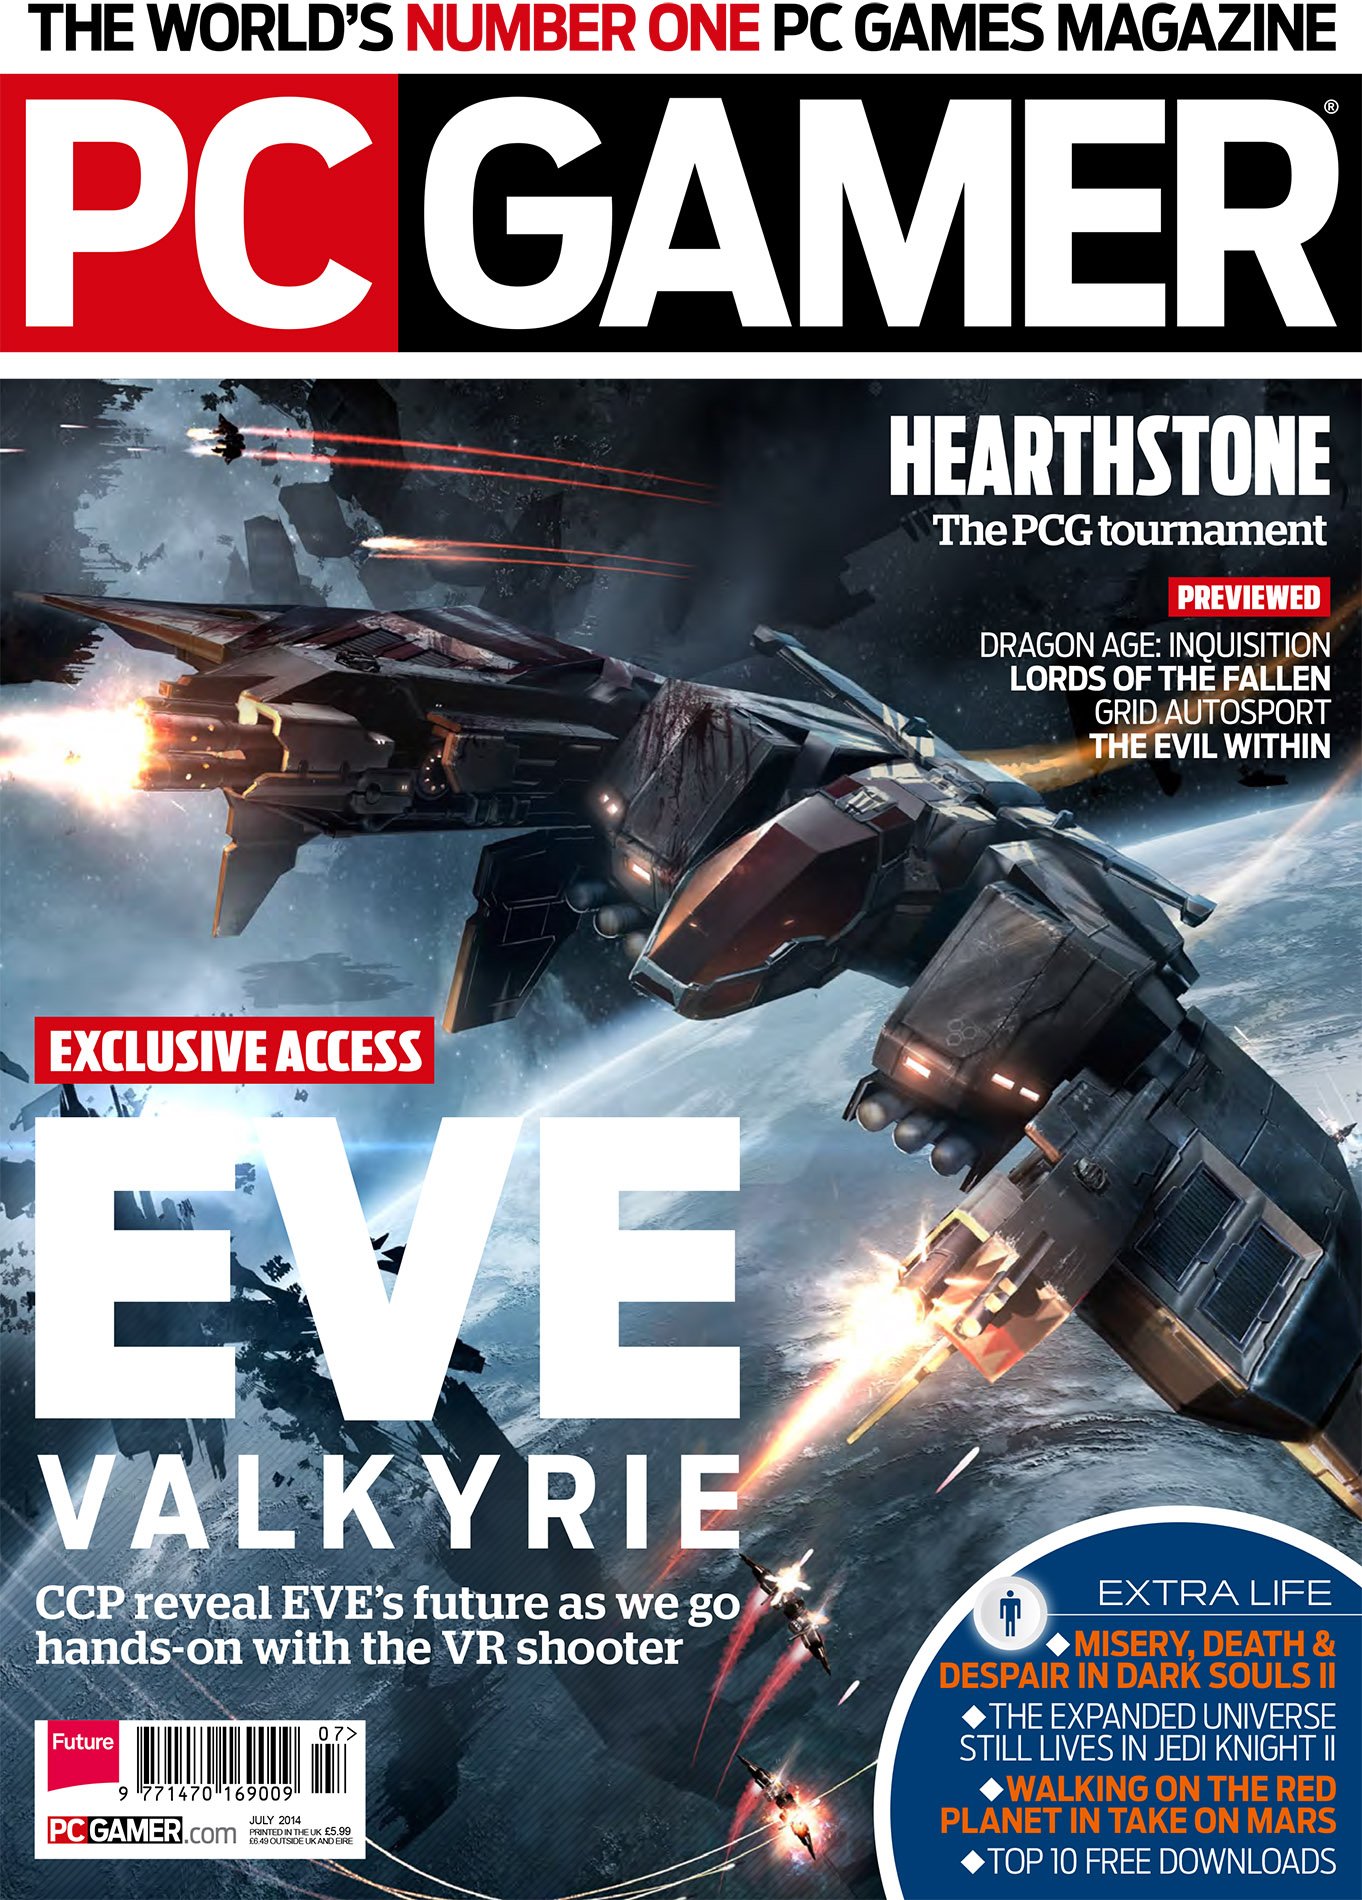 EVE Valkyrie on the cover of PC Gamer, July 2014